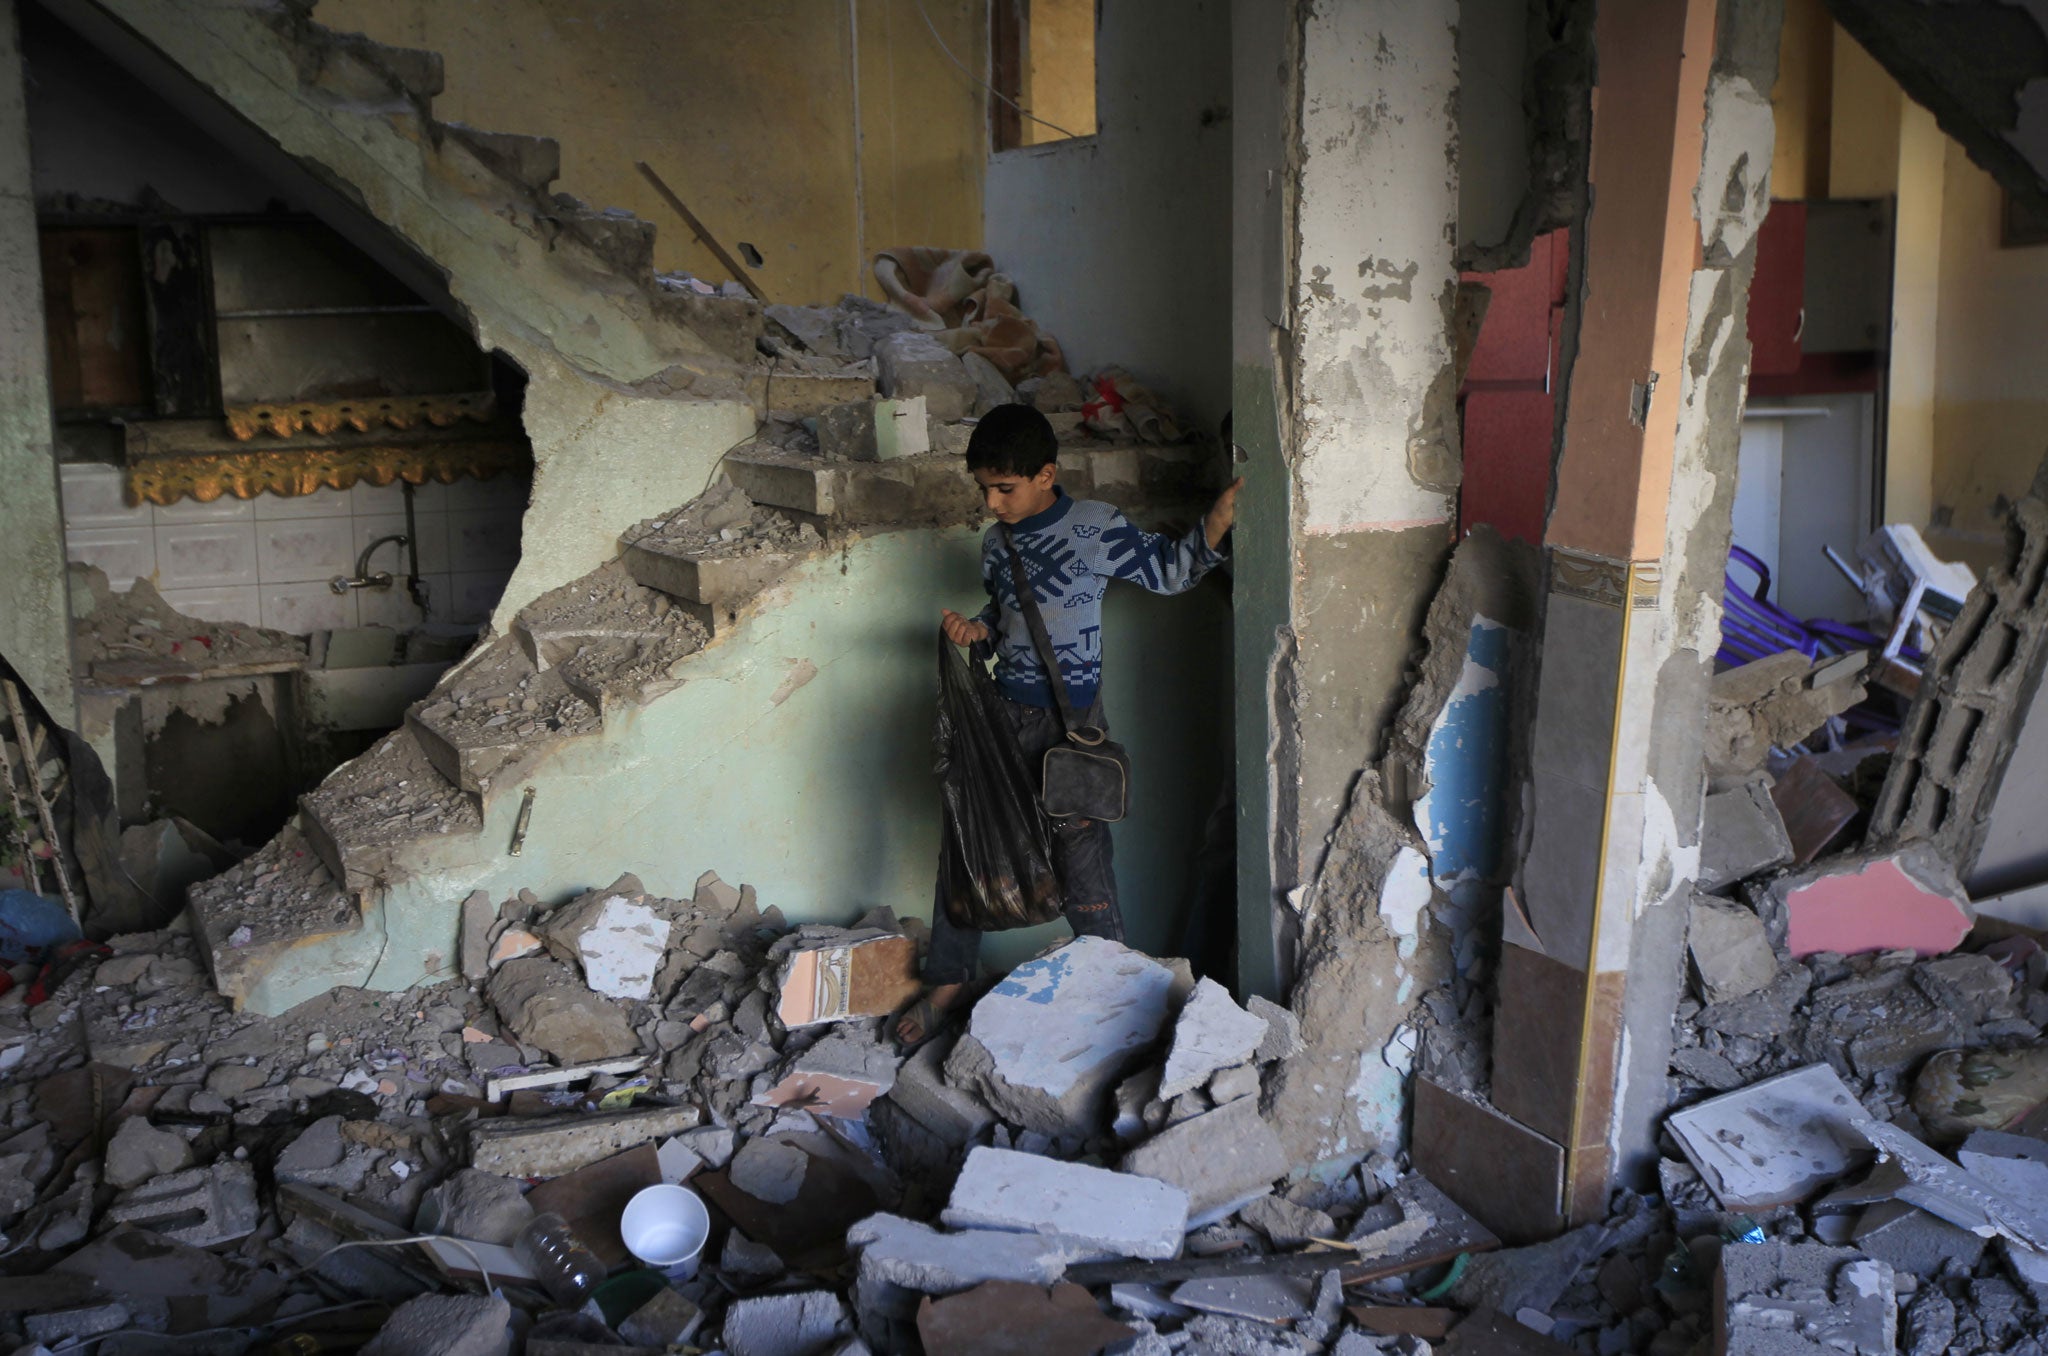 A Palestinian boy walks through the rubble inside the house of Hamas commander Raed al-Attar which was targeted by an overnight Israeli air strike in the southern Gaza Strip town of Rafah on November 20, 2012.